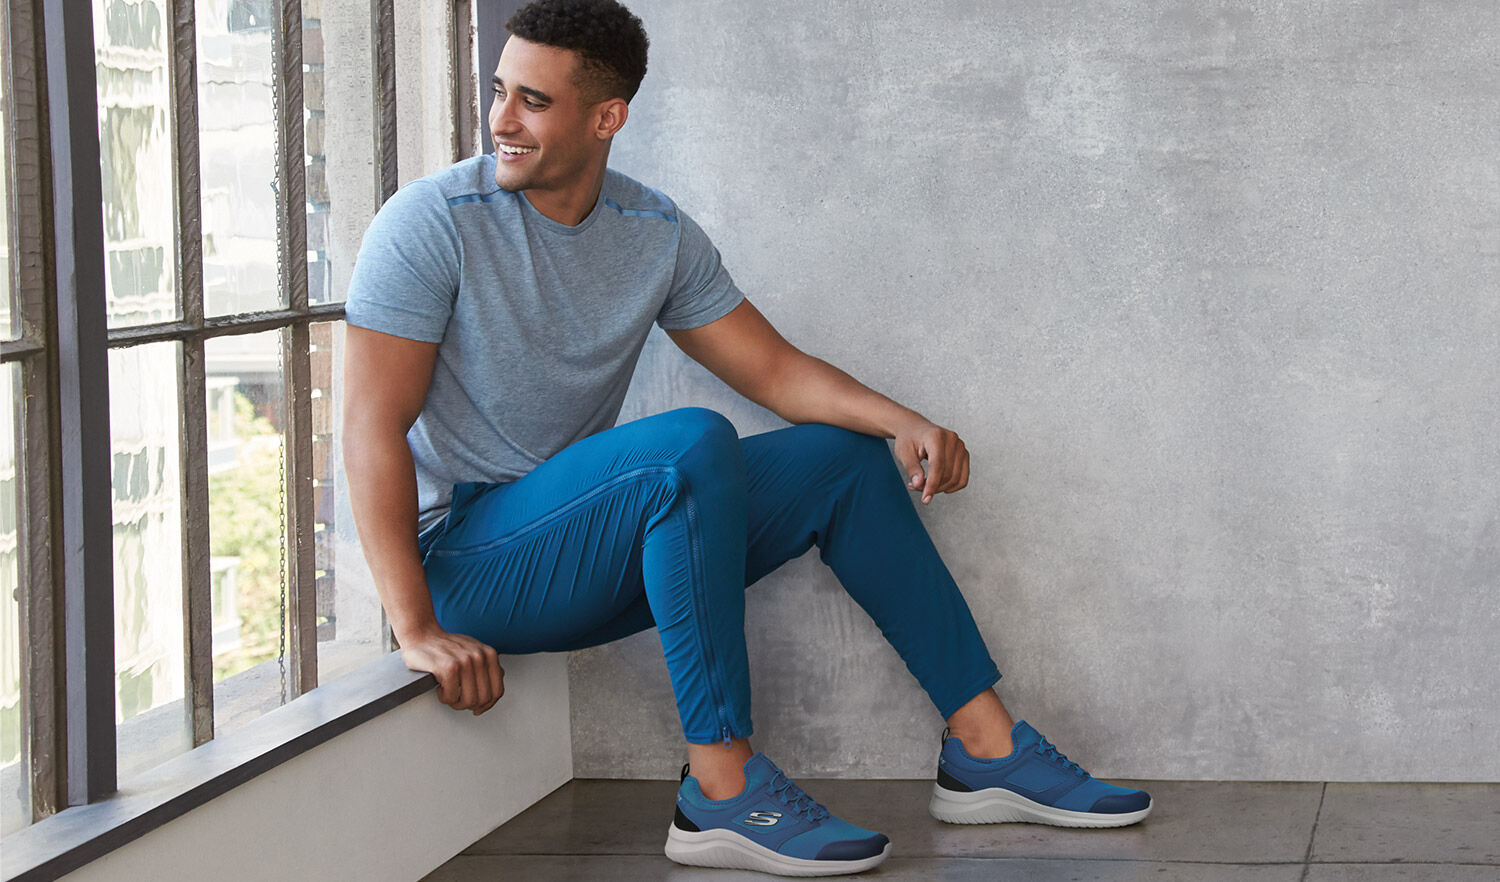 SKECHERS Official Site | Comfort That 